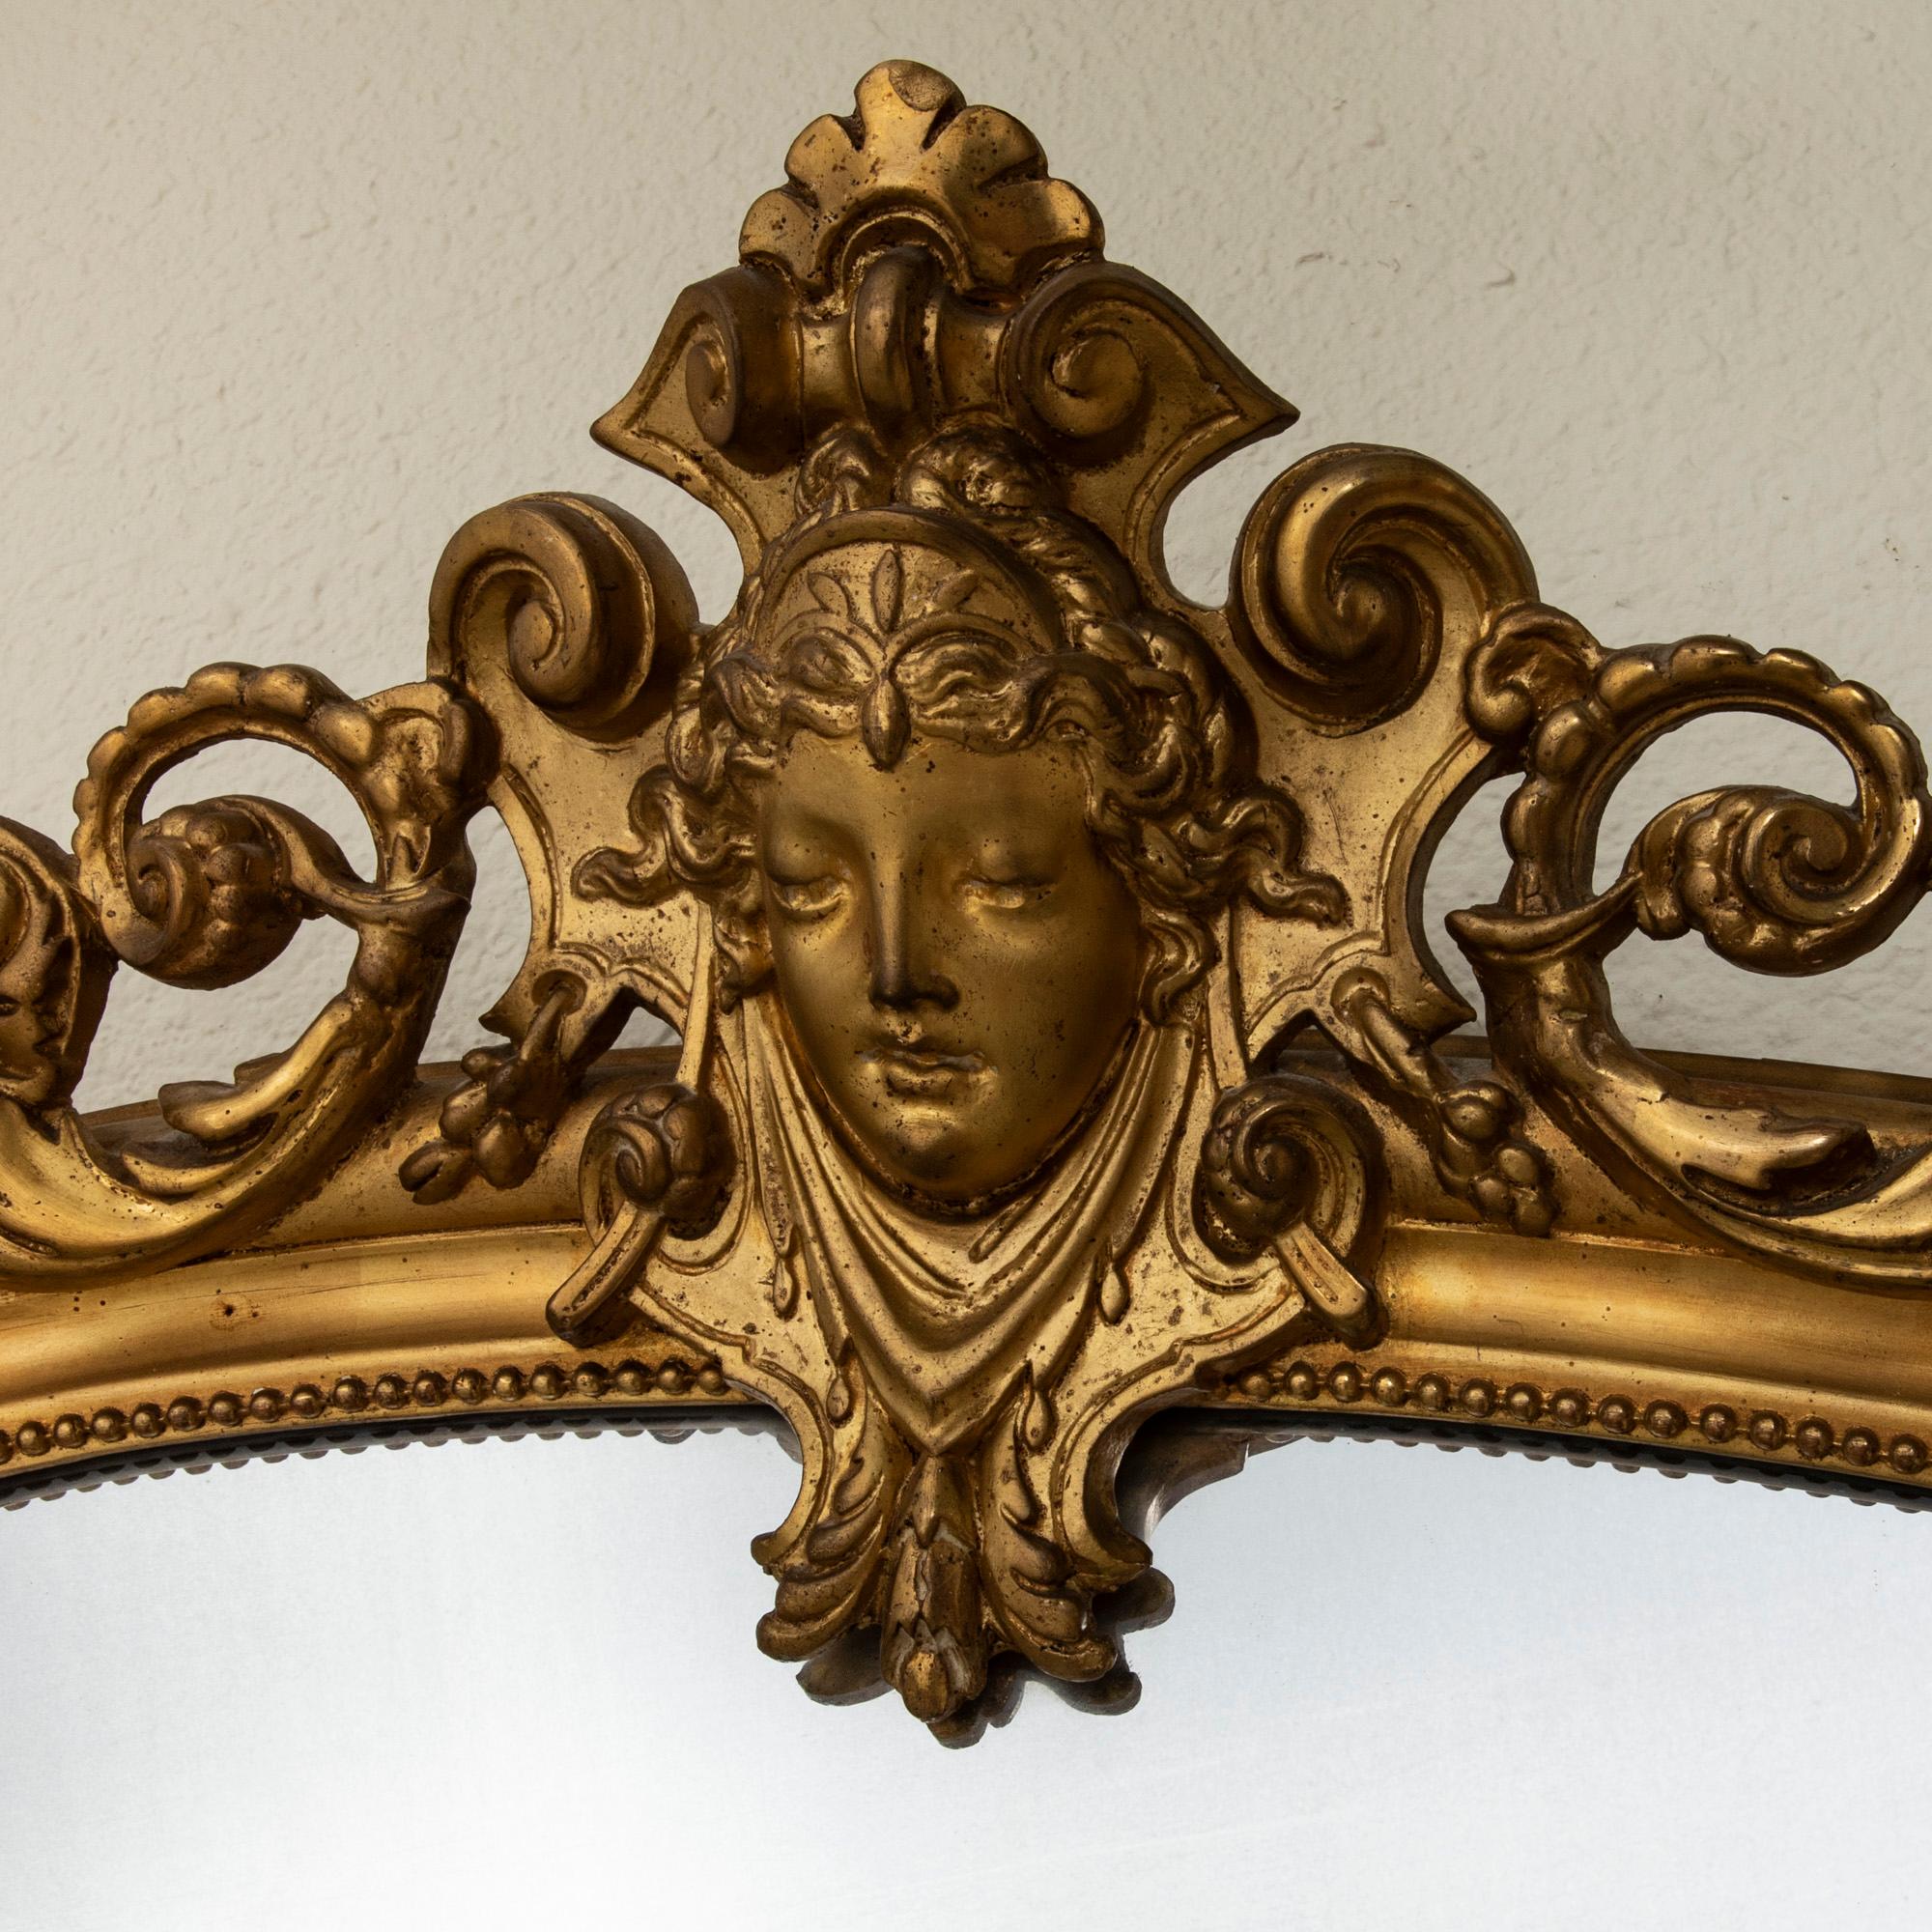 Mid-19th Century Napoleon III Period French Gilt Wood Mantel Mirror with Mask In Good Condition For Sale In Fayetteville, AR